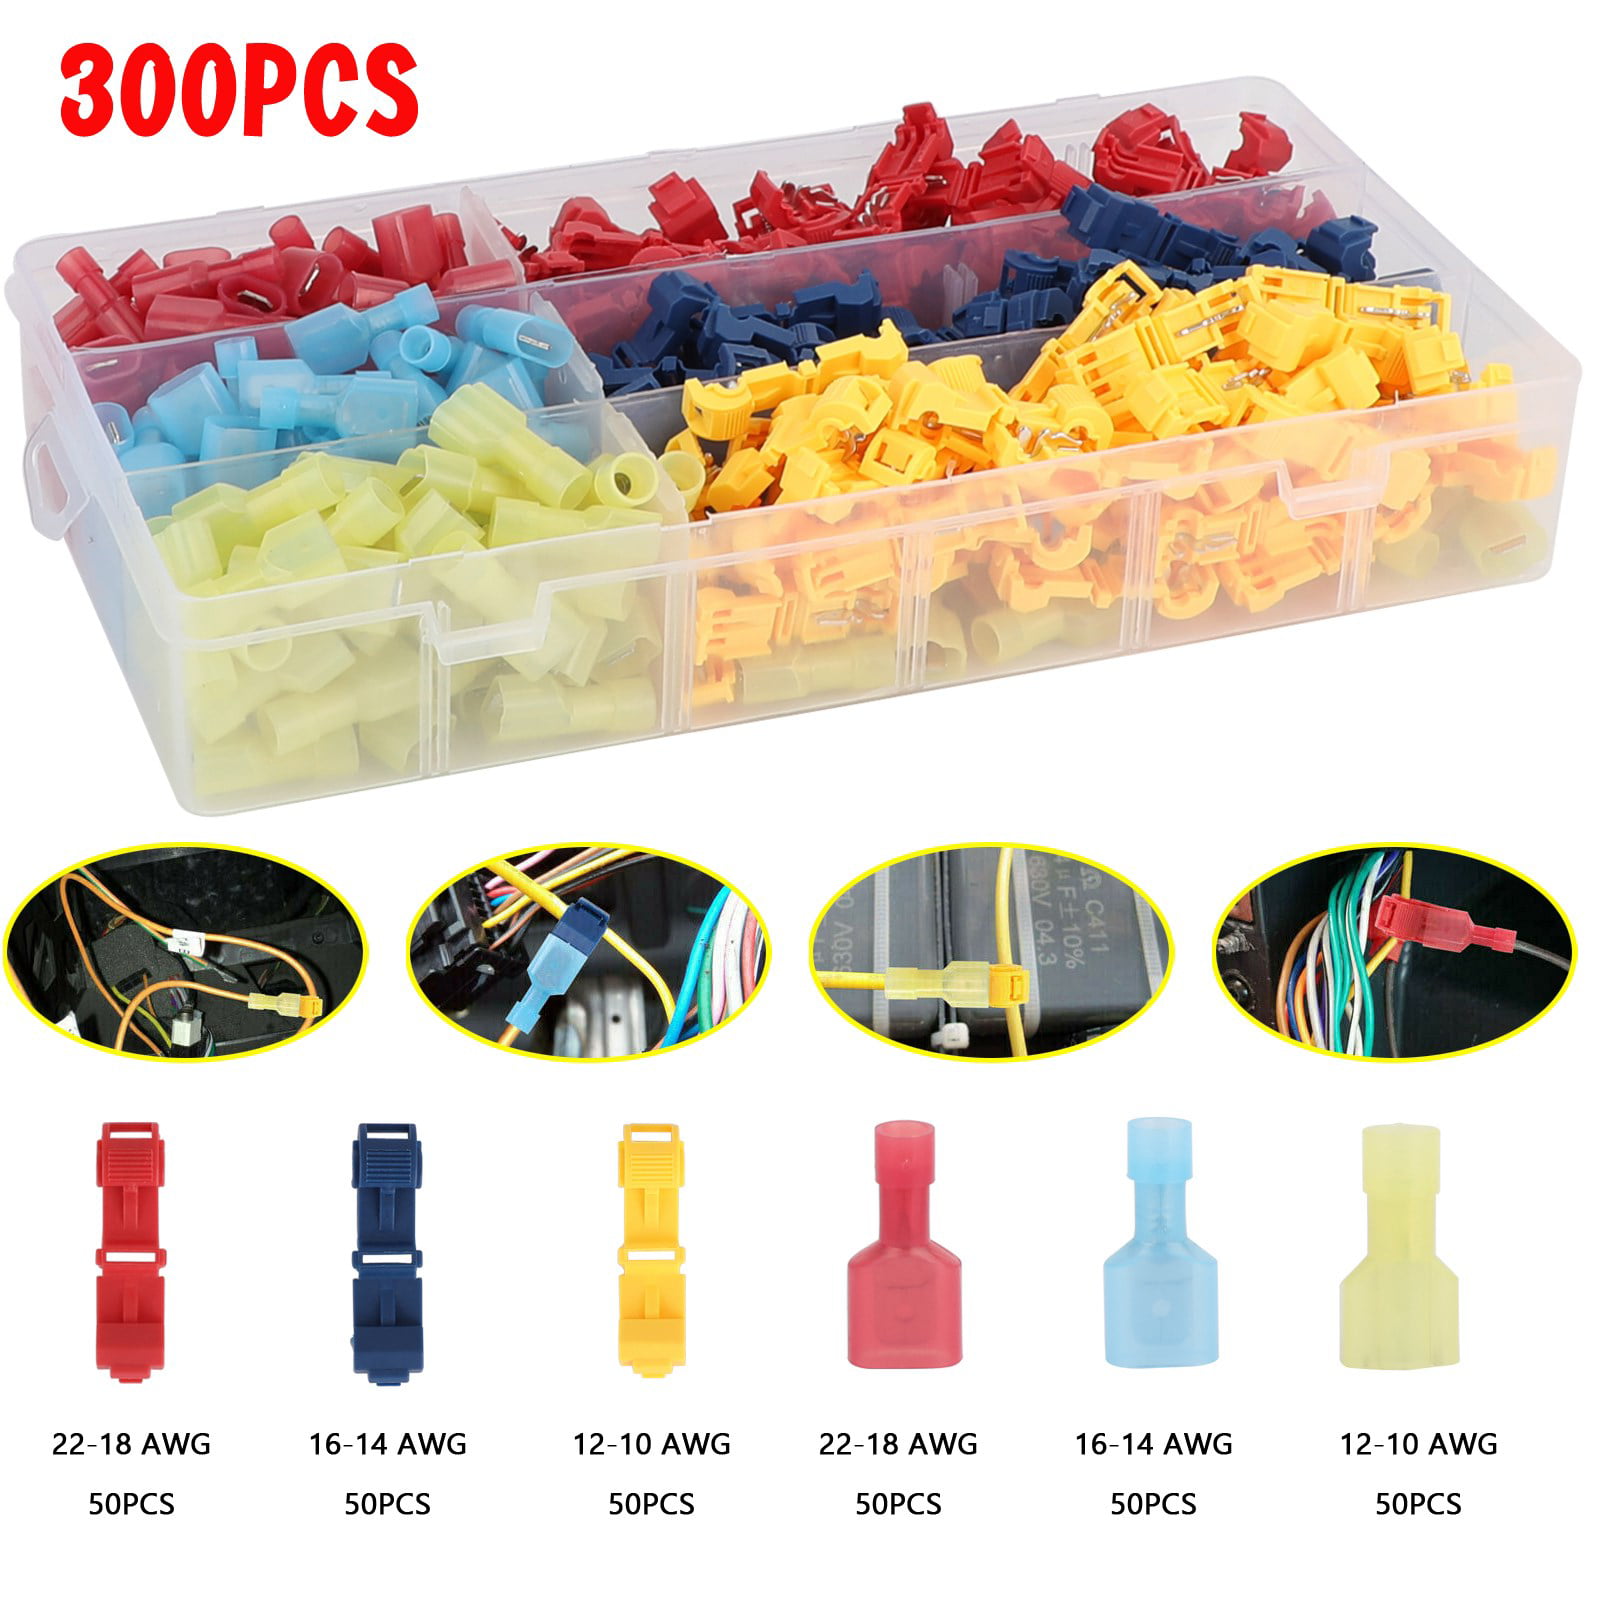 200pc Insulated 22-18 AWG T-Taps Quick Splice Wire Terminal Connectors Kit RED 